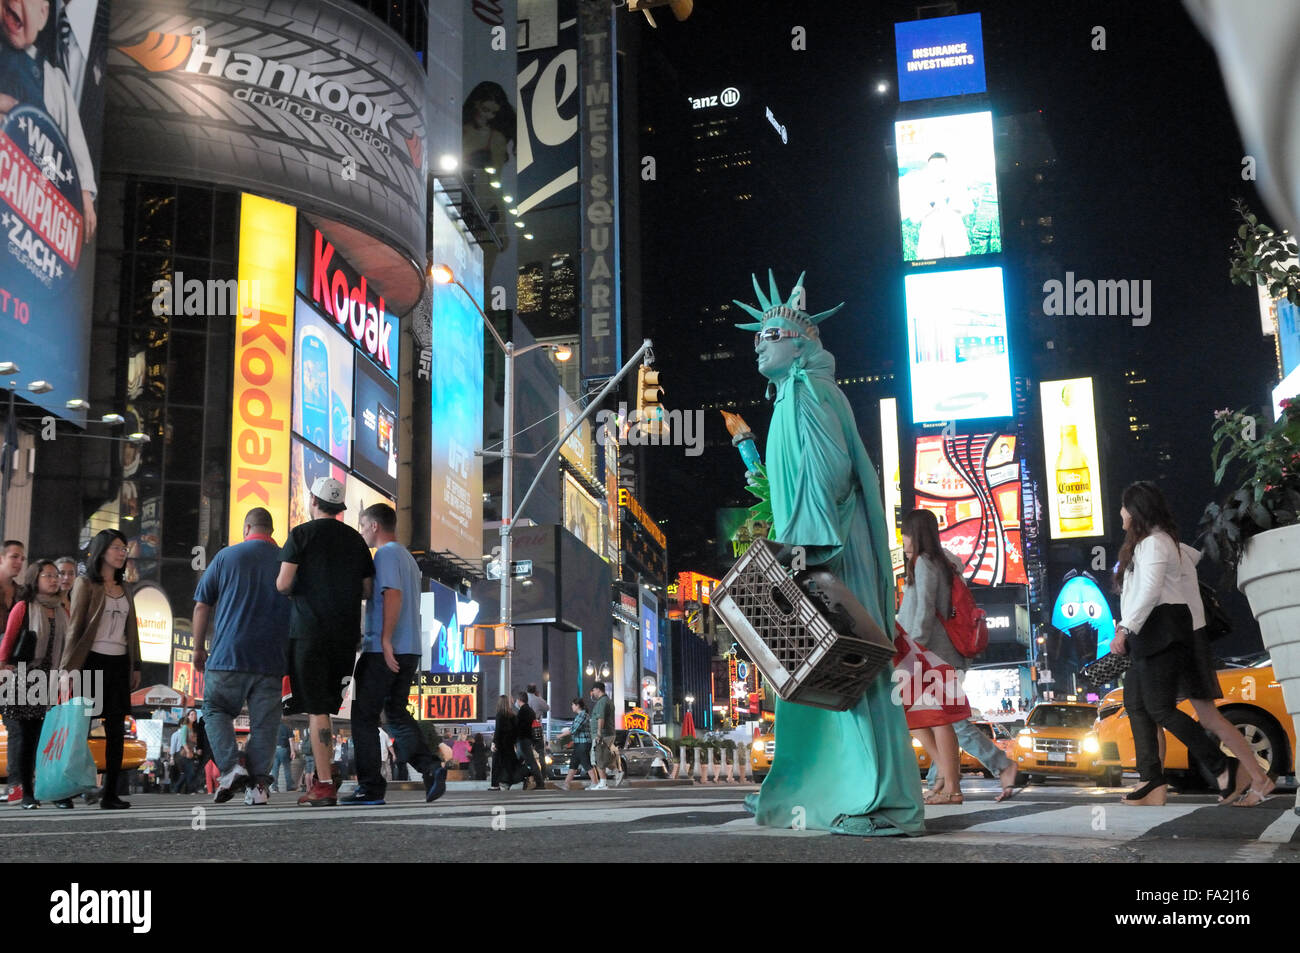 The Statue of Liberty heading home for the night, Times Square, New York, New York. Stock Photo